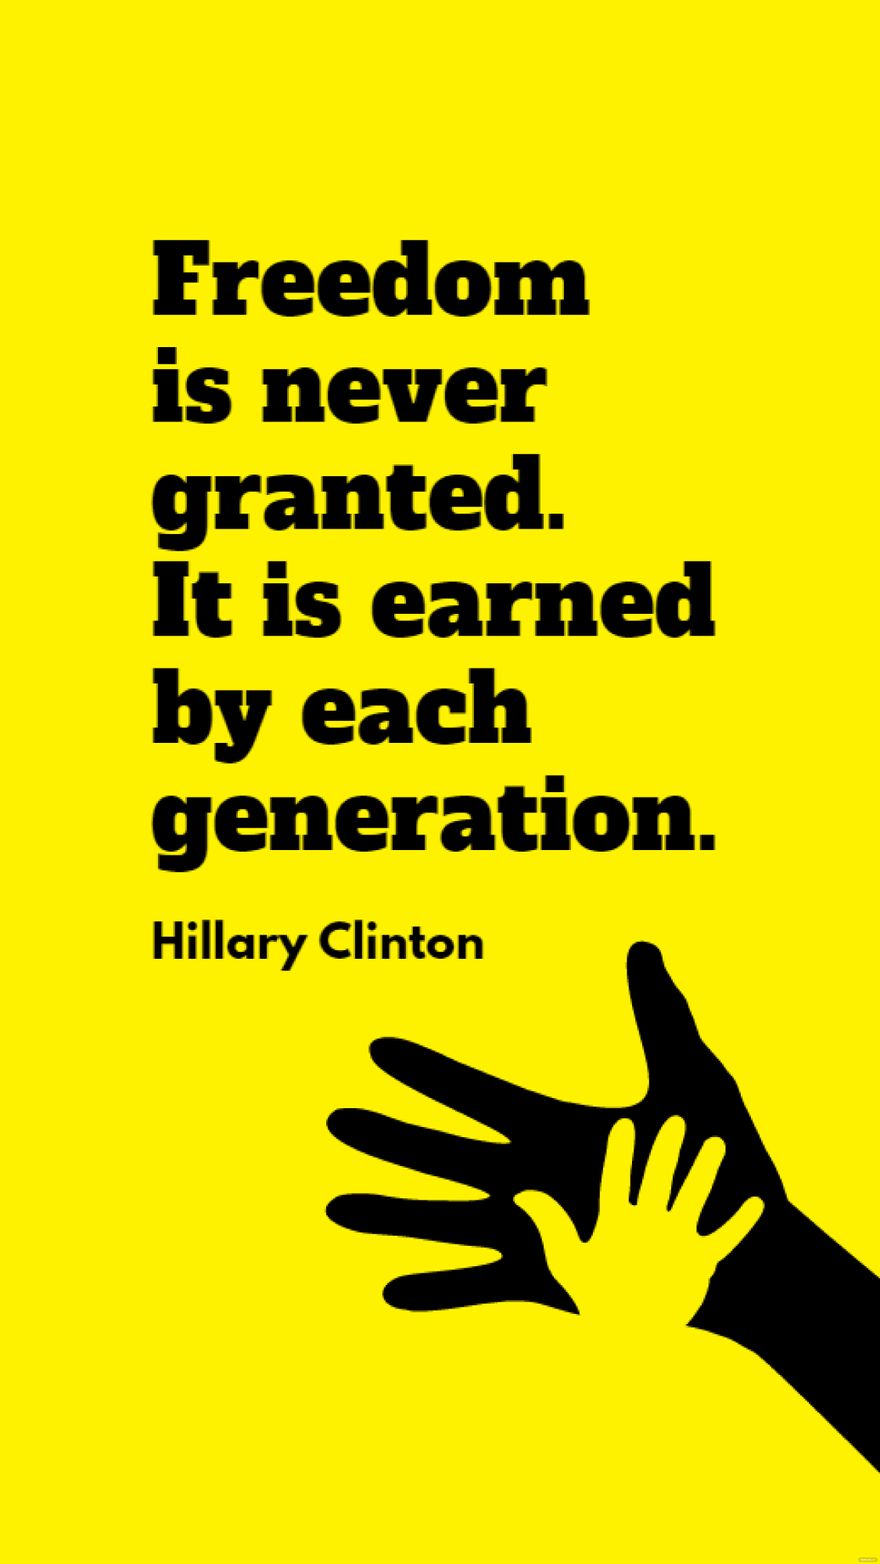 Hillary Clinton - Freedom is never granted. It is earned by each generation. in JPG